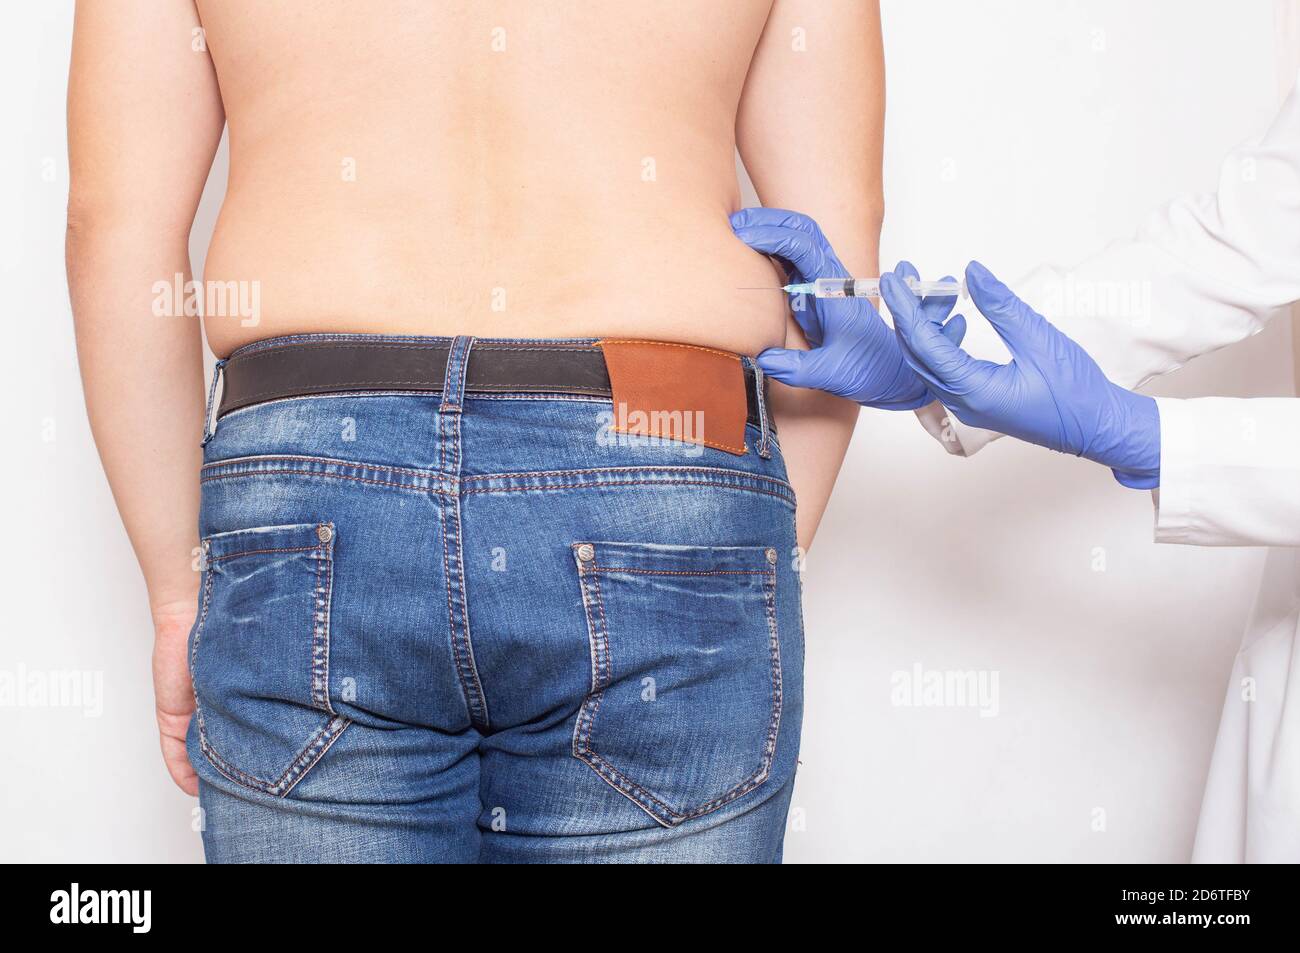 The doctor gives a subcutaneous injection to break down fat deposits on the sides of a man, metabolism Stock Photo